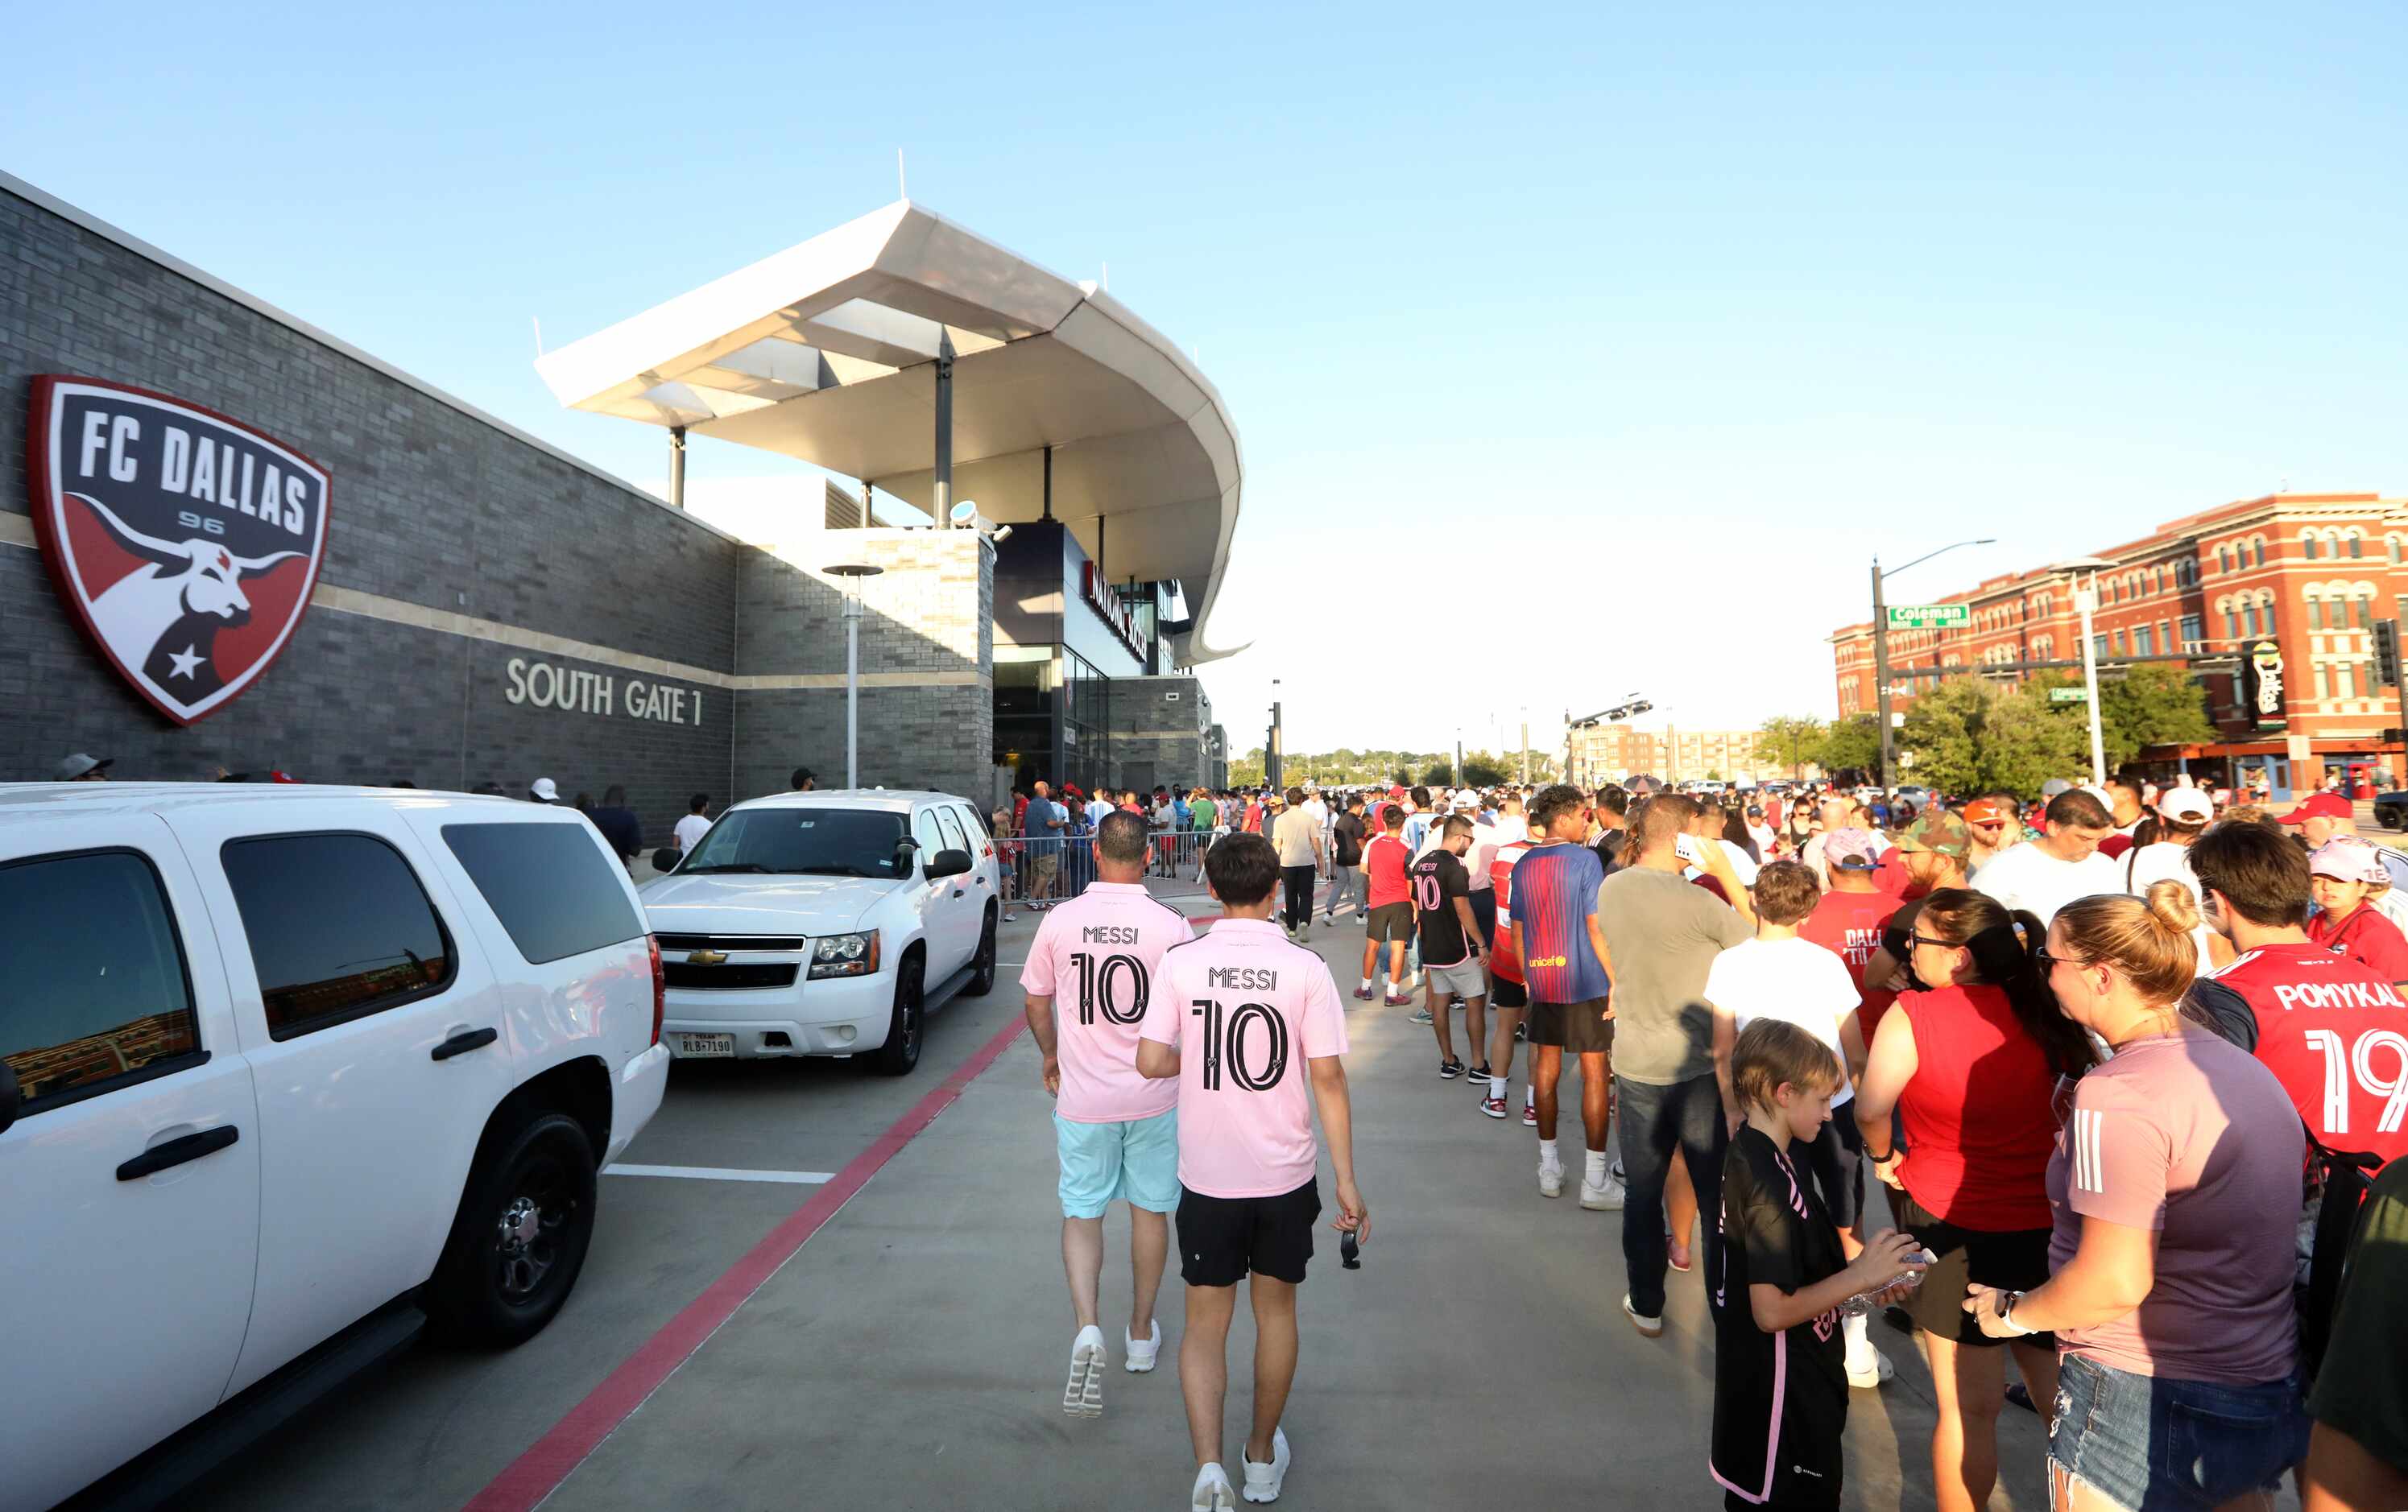 Fans wait in line as the gates open for an FC Dallas game at Toyota Stadium in Frisco, TX,...